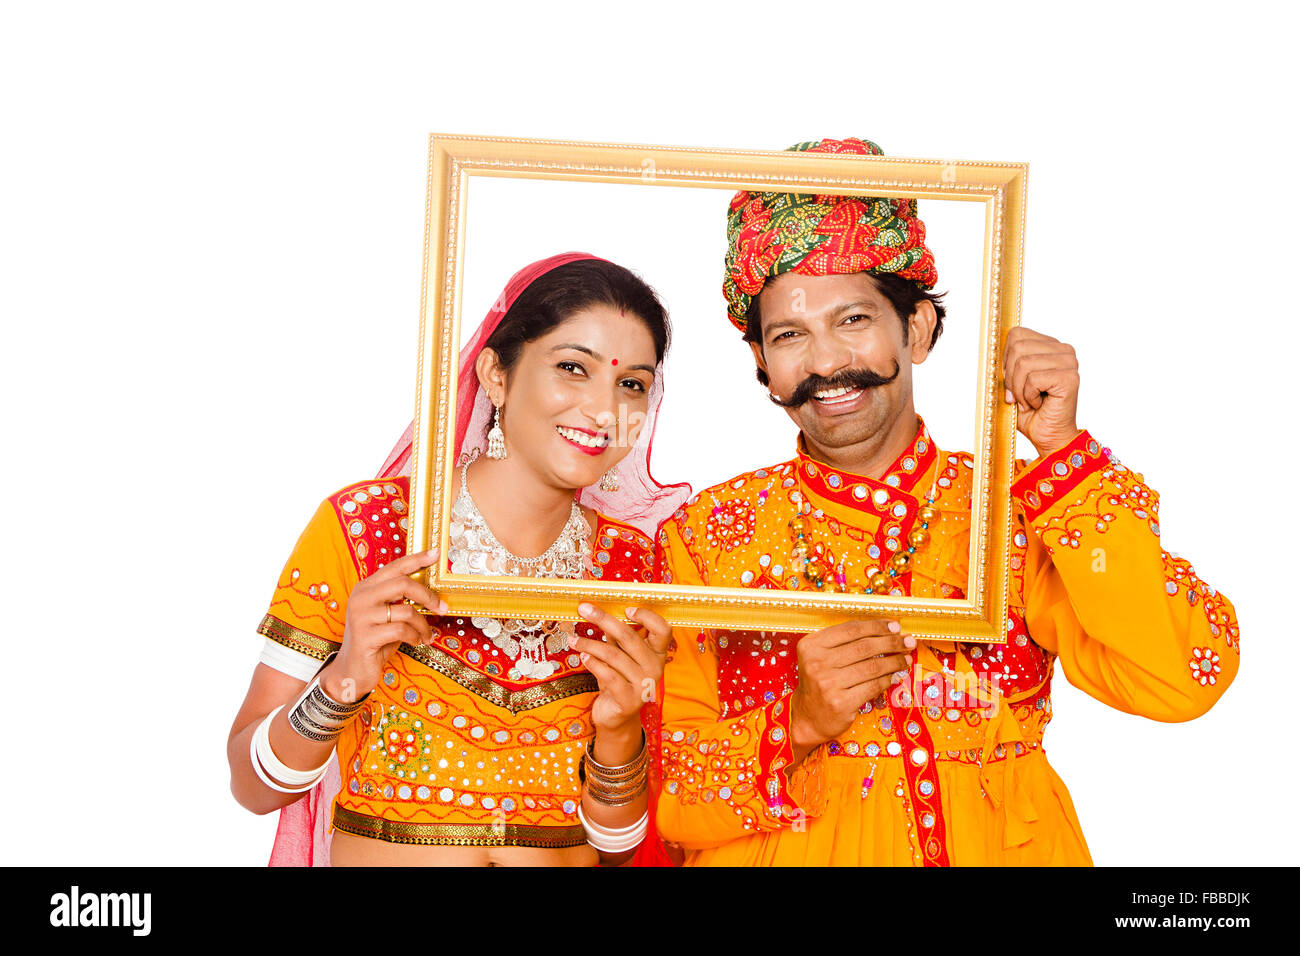 2 indian Rural Gujrati Married Couple Frame Picture showing Stock Photo